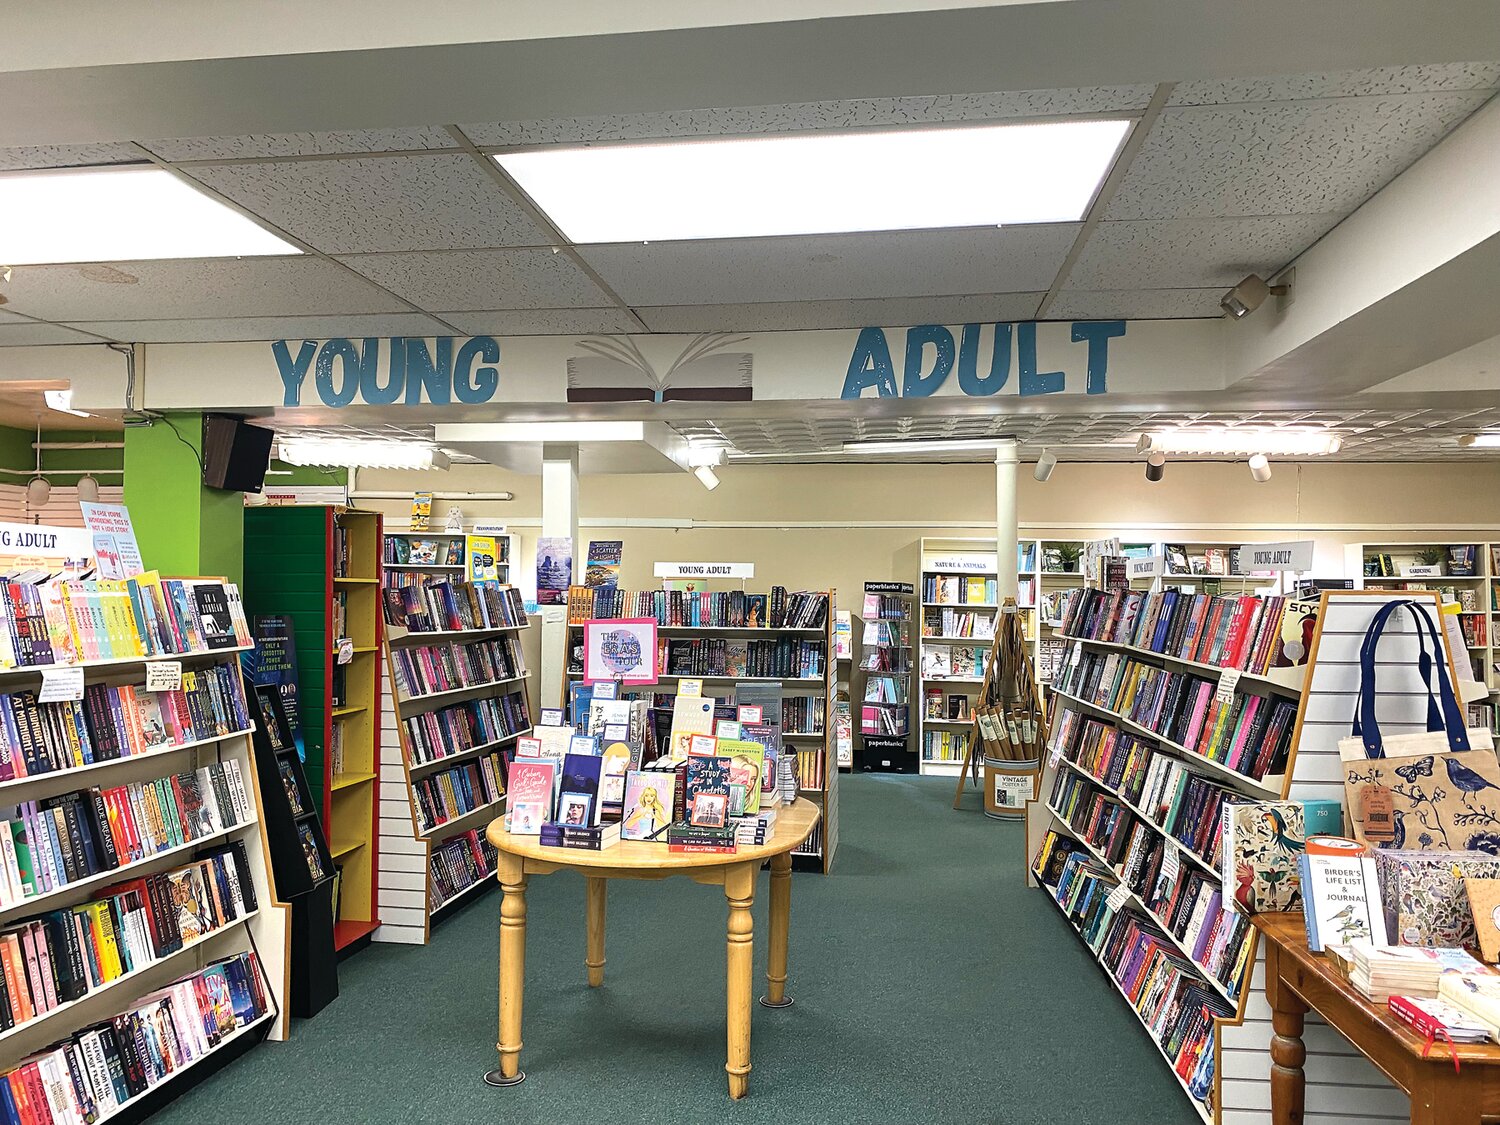 The bookstore's young adult section helps readers searching for the right books for those in that age group.